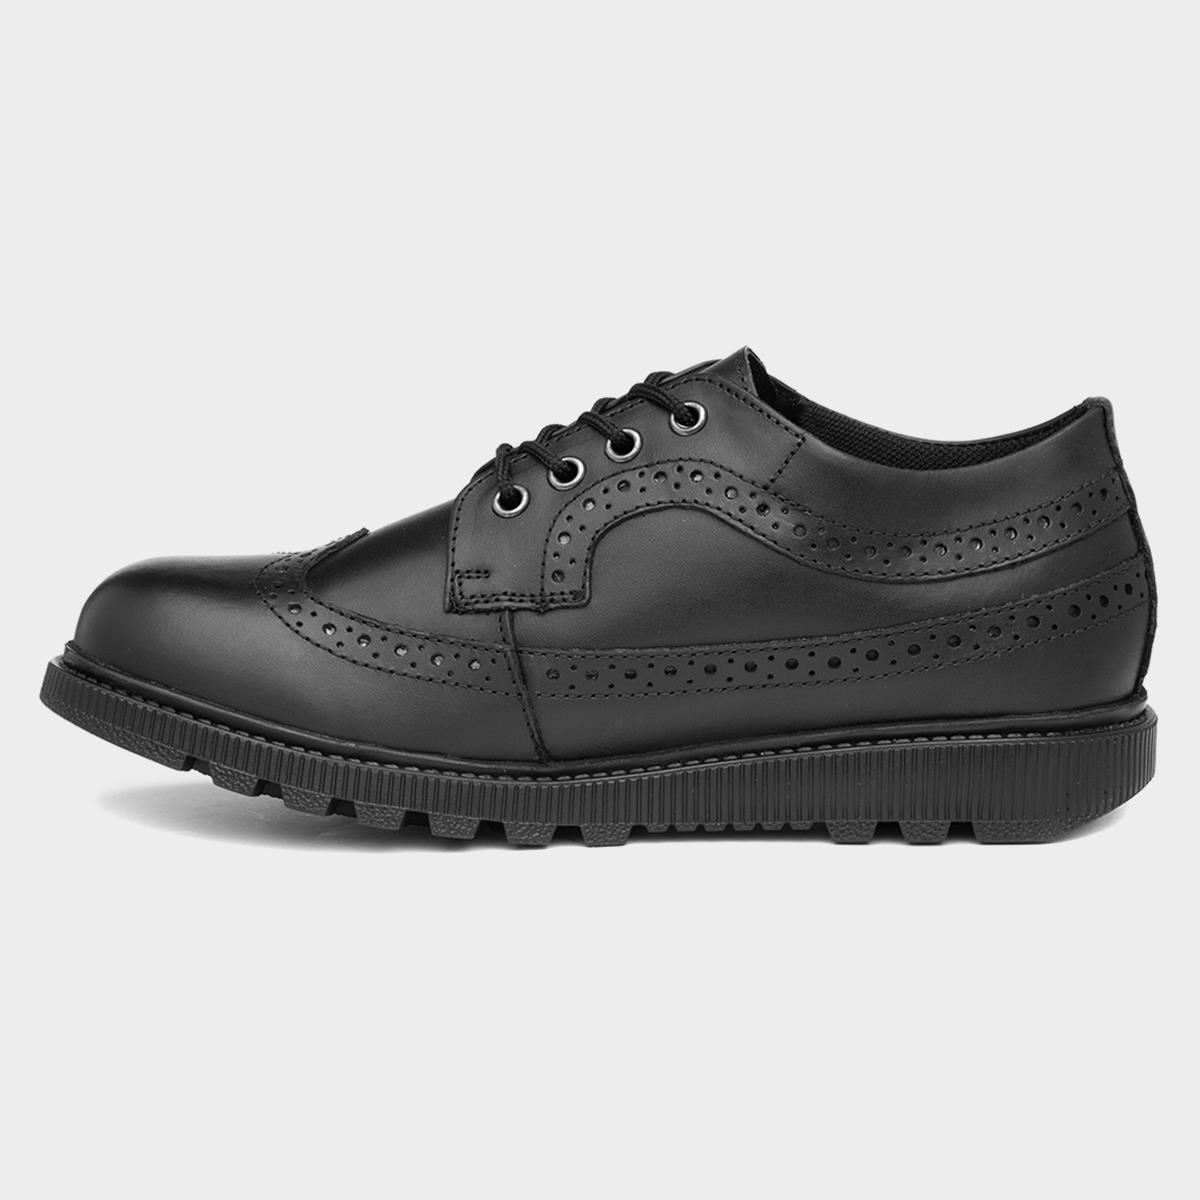 Hush Puppies Felicity Girls Black Leather Brogues-204045 | Shoe Zone